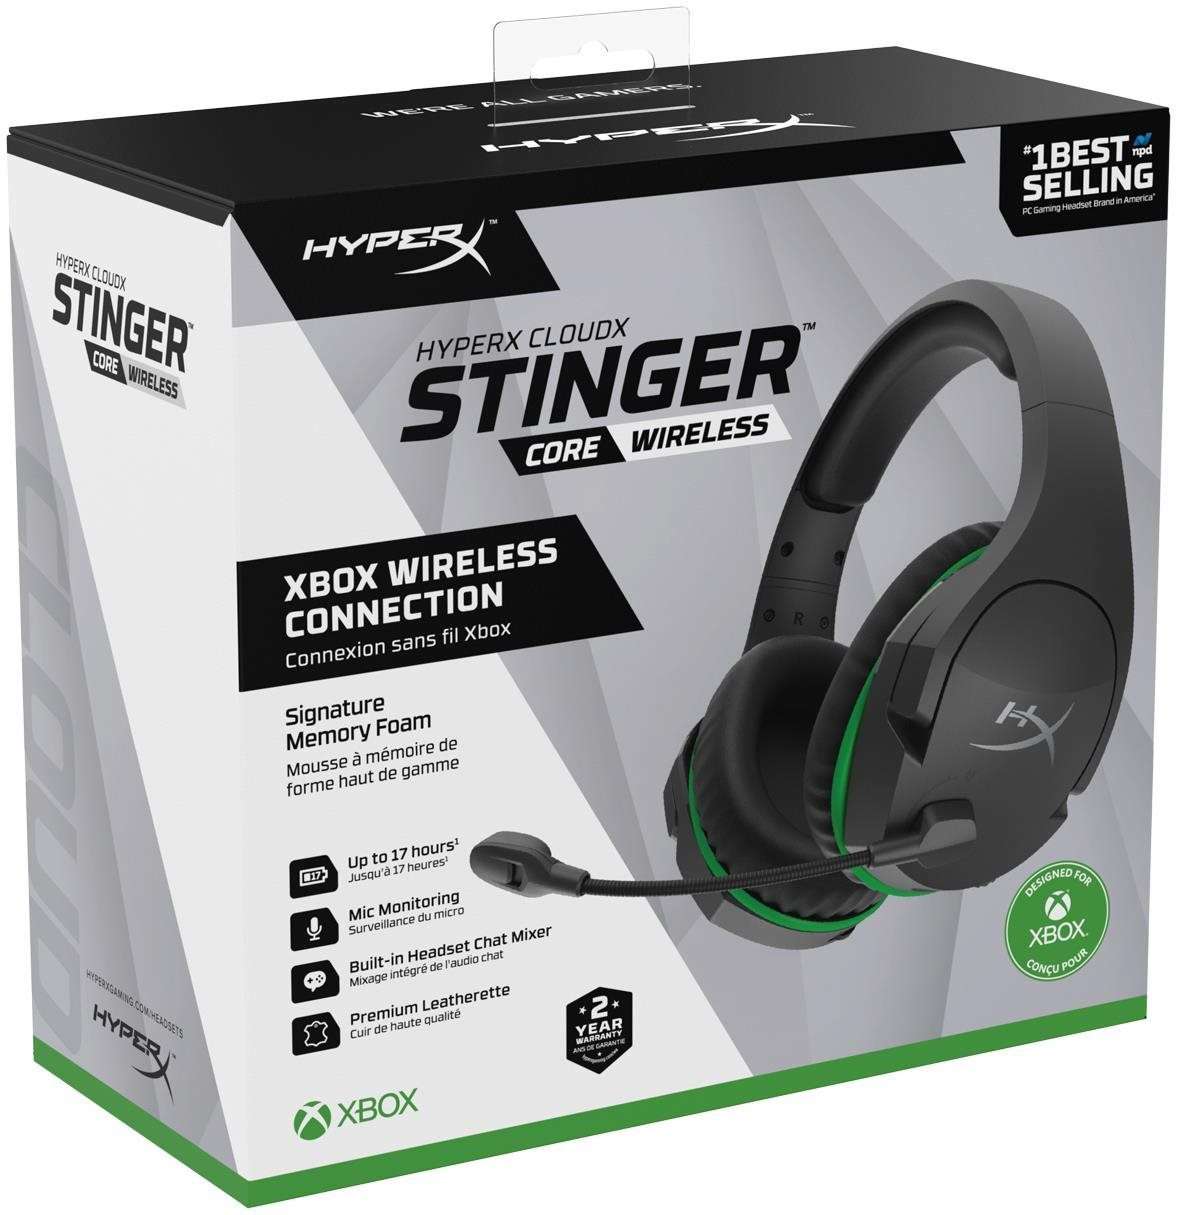 Gaming Headphones HyperX CloudX Stinger Core Wireless (Xbox Licensed) Packaging/box